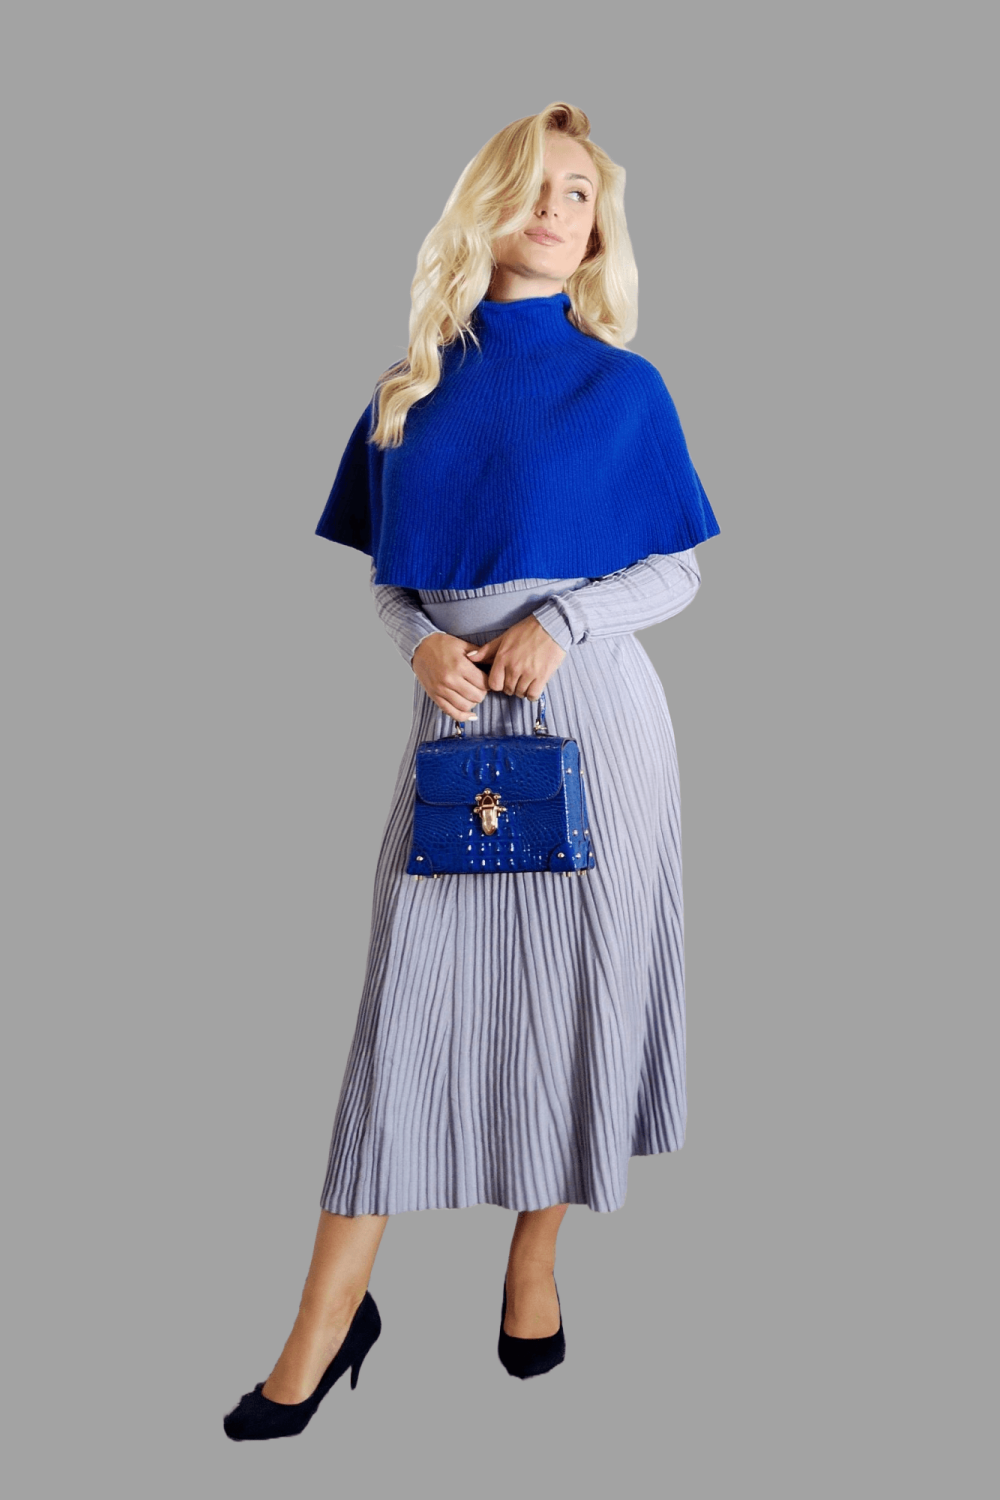 100% Cashmere Poncho in Royal Blue